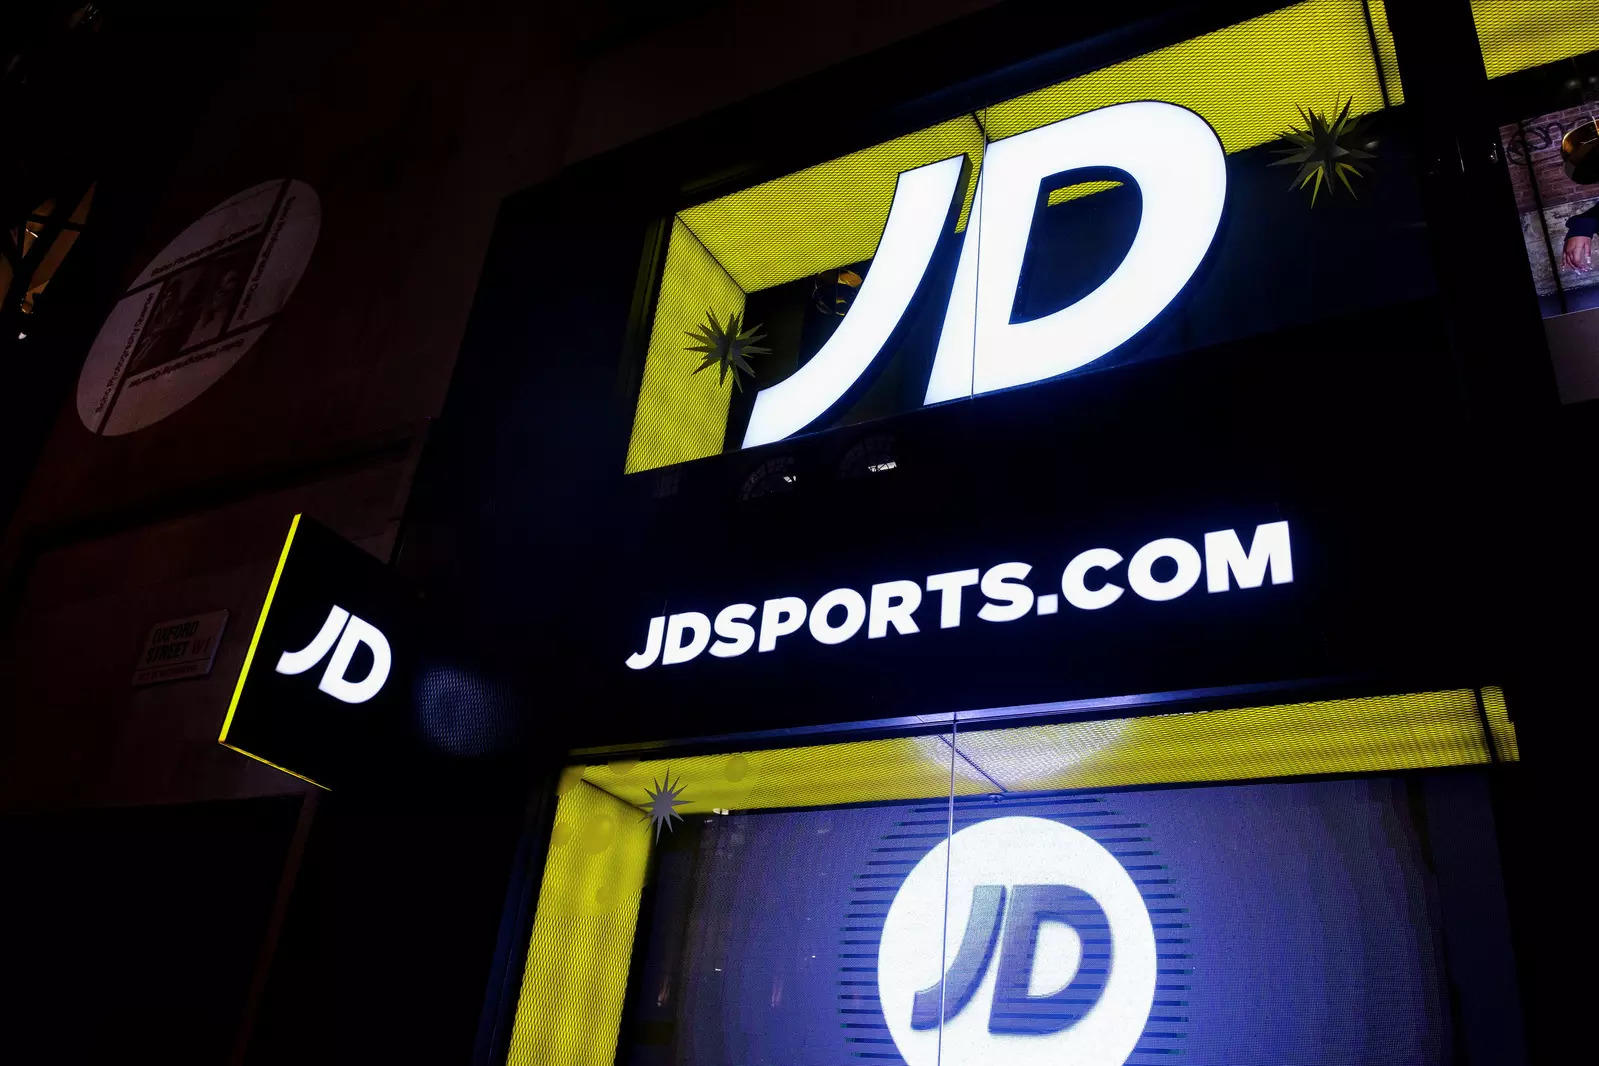  FILE PHOTO: JD Sports logo is seen on the exterior of a store in London, Britain, November 17, 2021. Picture taken November 17, 2021. REUTERS/May James